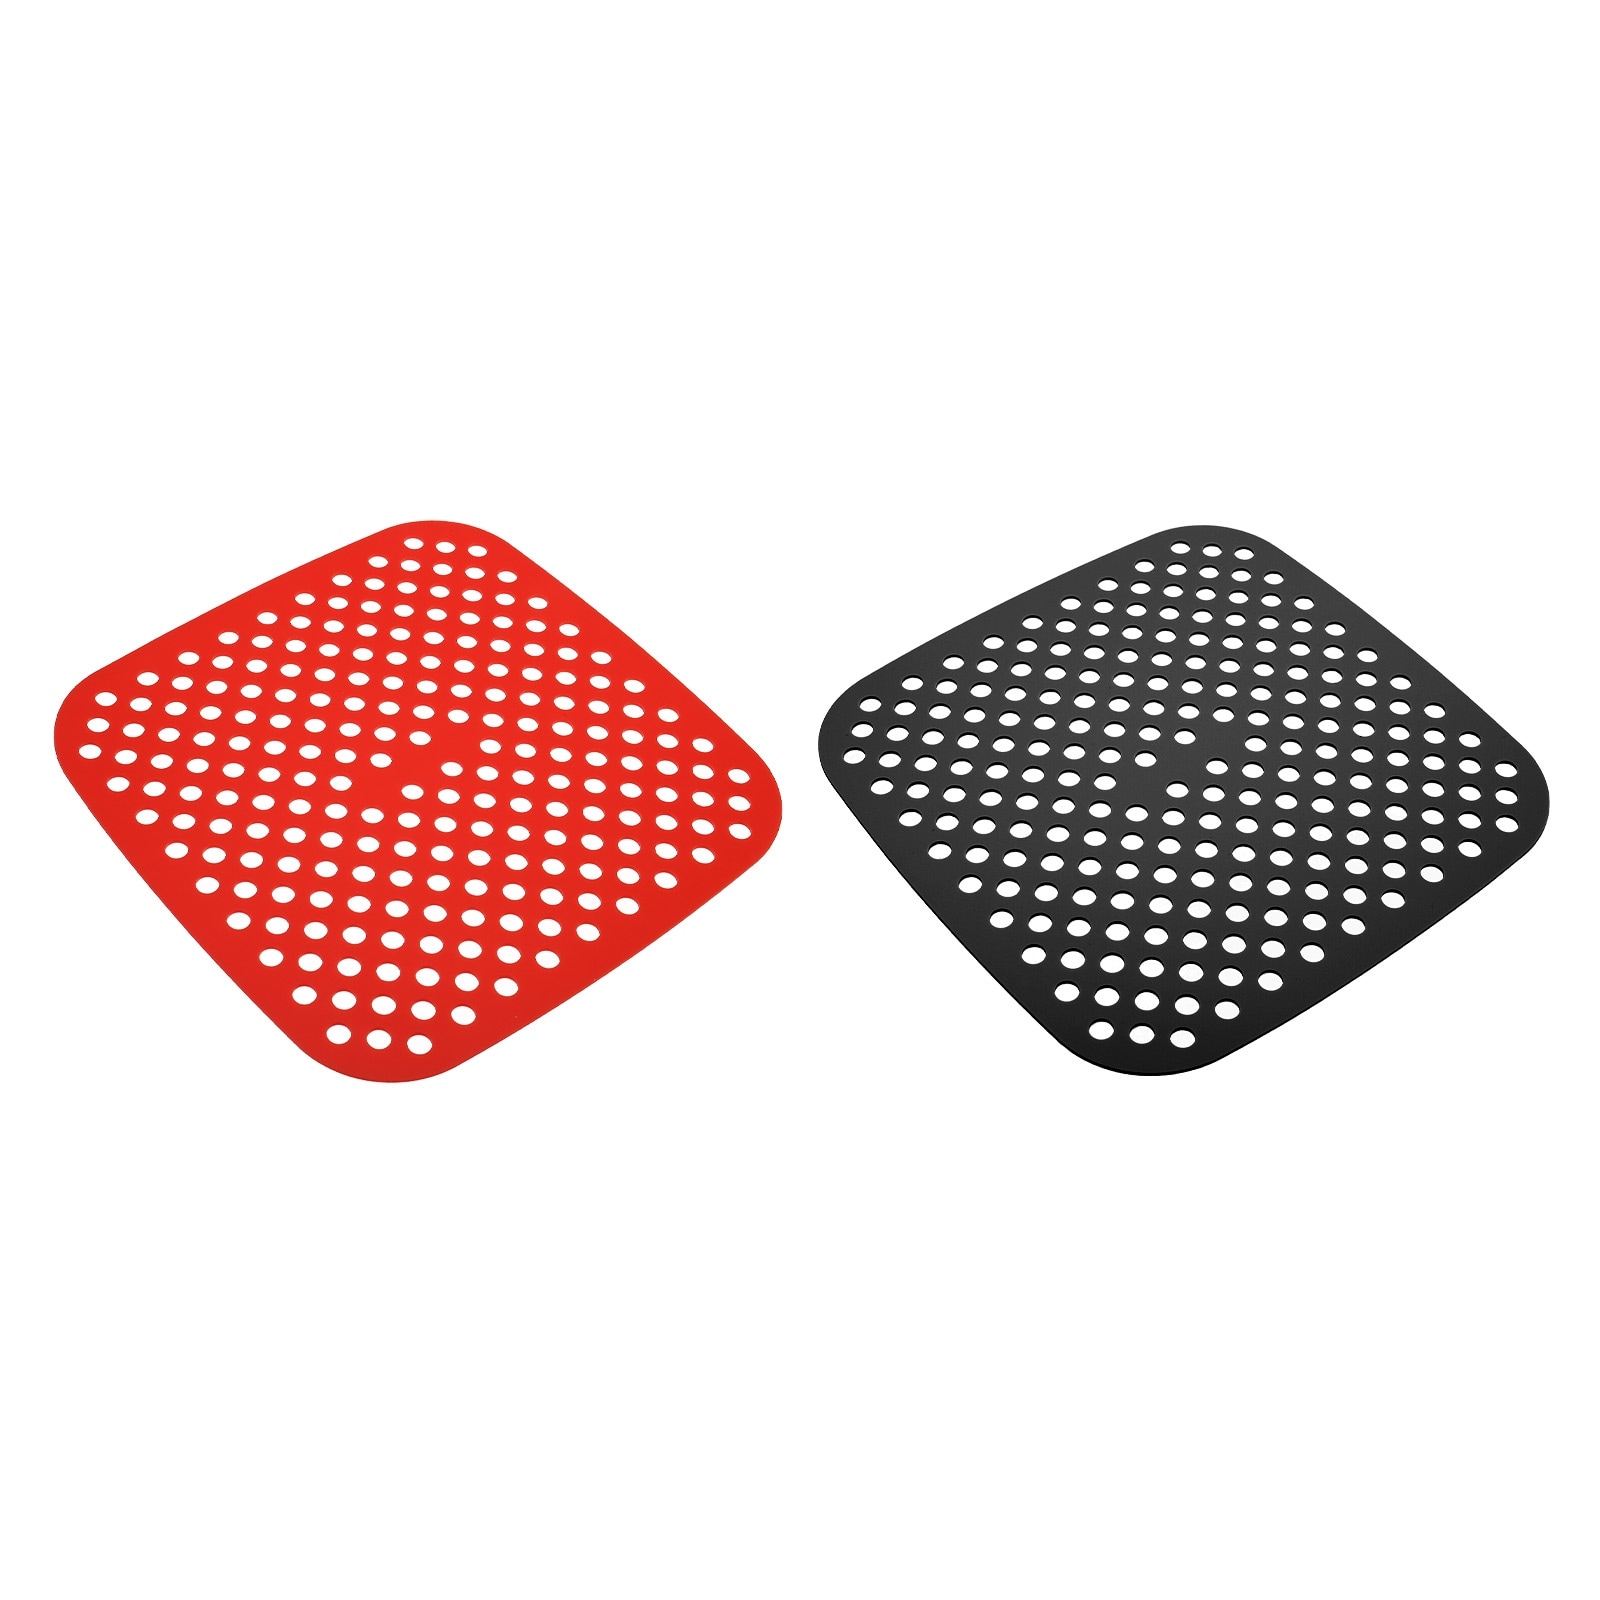 2-Pack Square Silicone Air Fryer Liners 8 Inch for 4 to 6 QT Reusable Air  Fryer